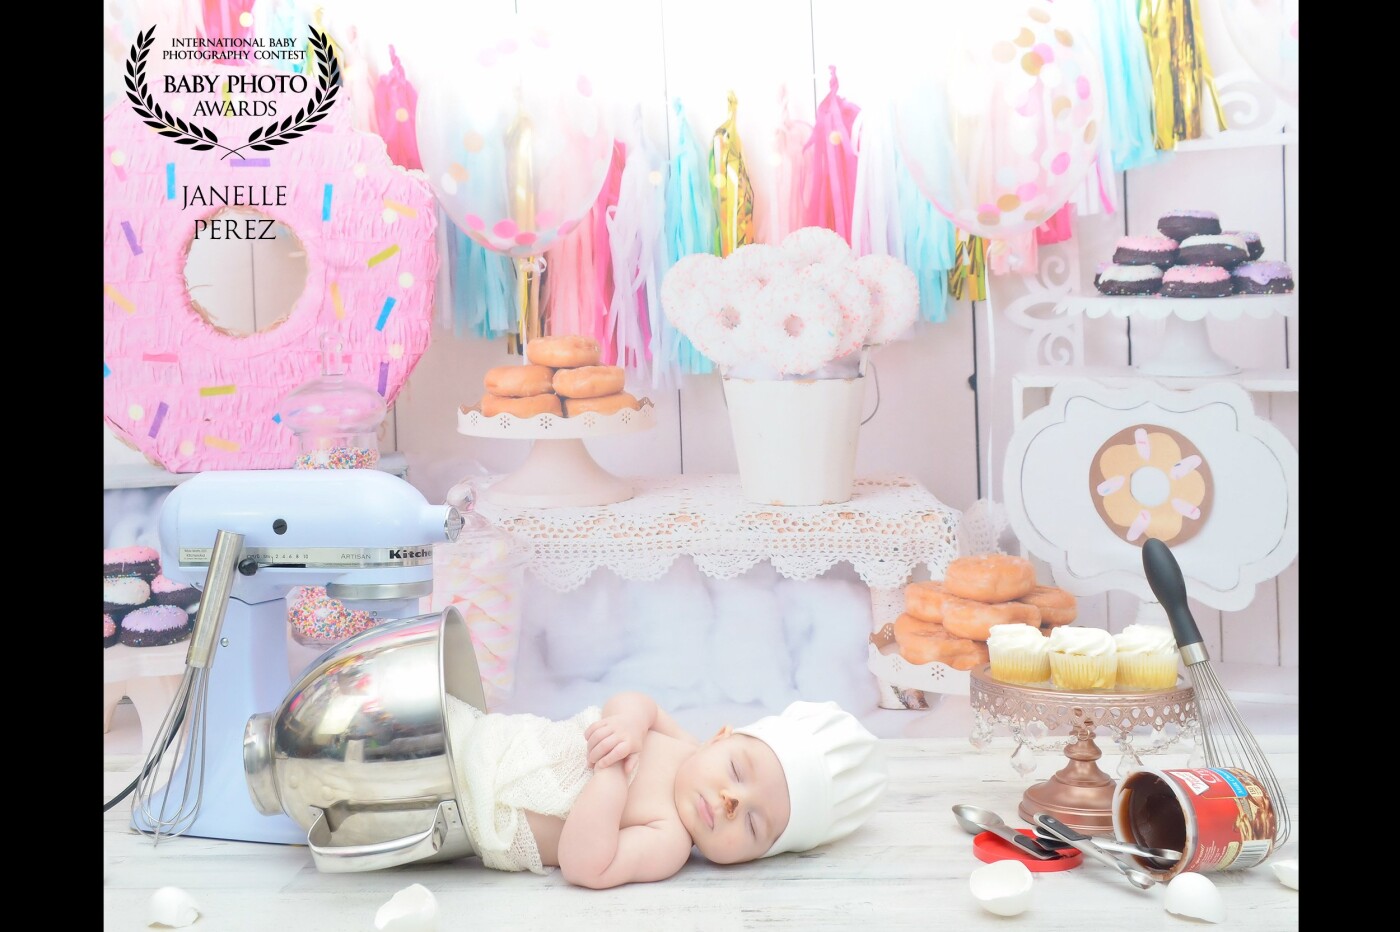 Thank you for selecting this image. Nothing is sweeter than a sleeping baby drifting off to dreamland while laying in her mother's mixing bowl. My client owns a local bakery and requested that various supplies from the business be used as a part of the props for her new born photoshoot.